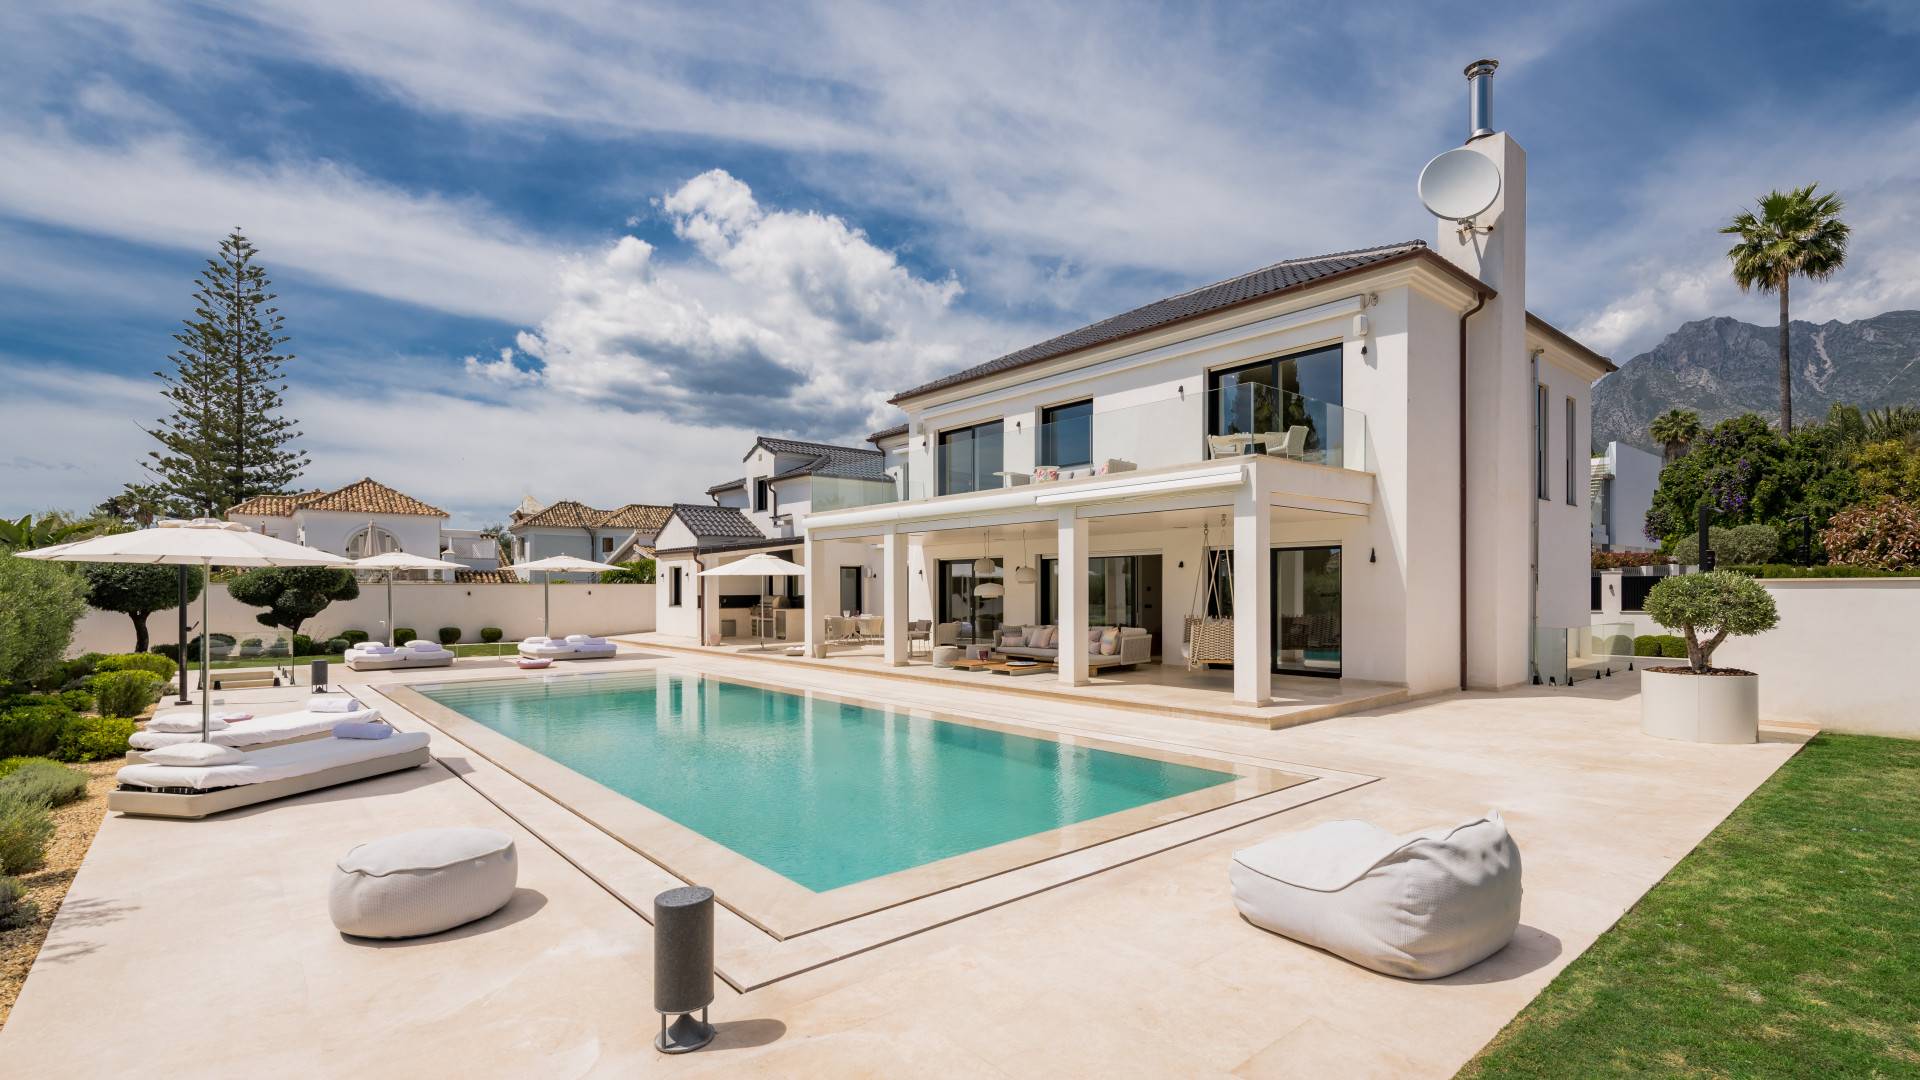 If you are looking for something very modern and very stylish, this magnificent property with innovative features and cutting edge technologies is probably for you.